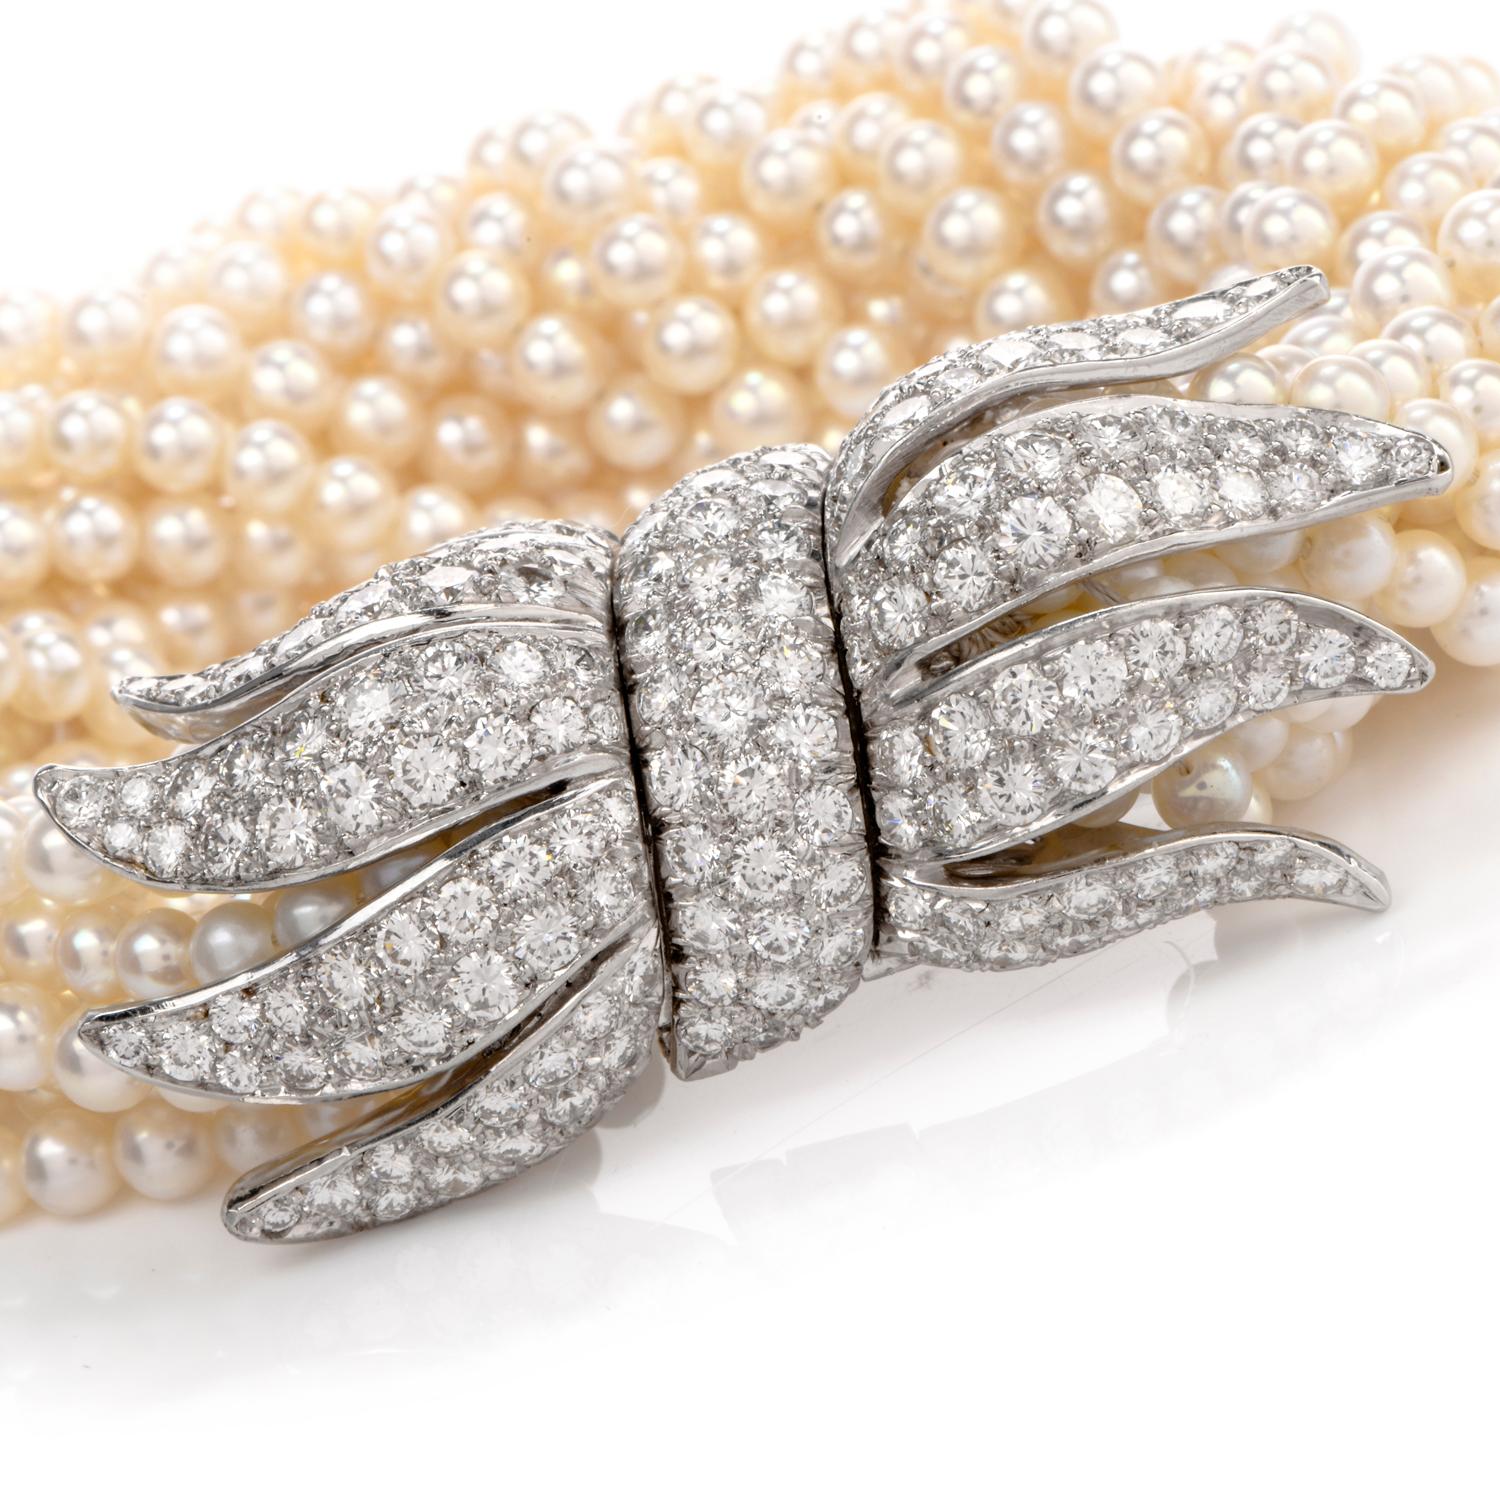 This Vintage Diamond and Multistrand Pearl Bracelet is inspired with an extraordinary Peacock style capping on the ends and crafted in Platinum. This bracelet is sure to Light the room as it's worn yet offers a subtle accent to complete any